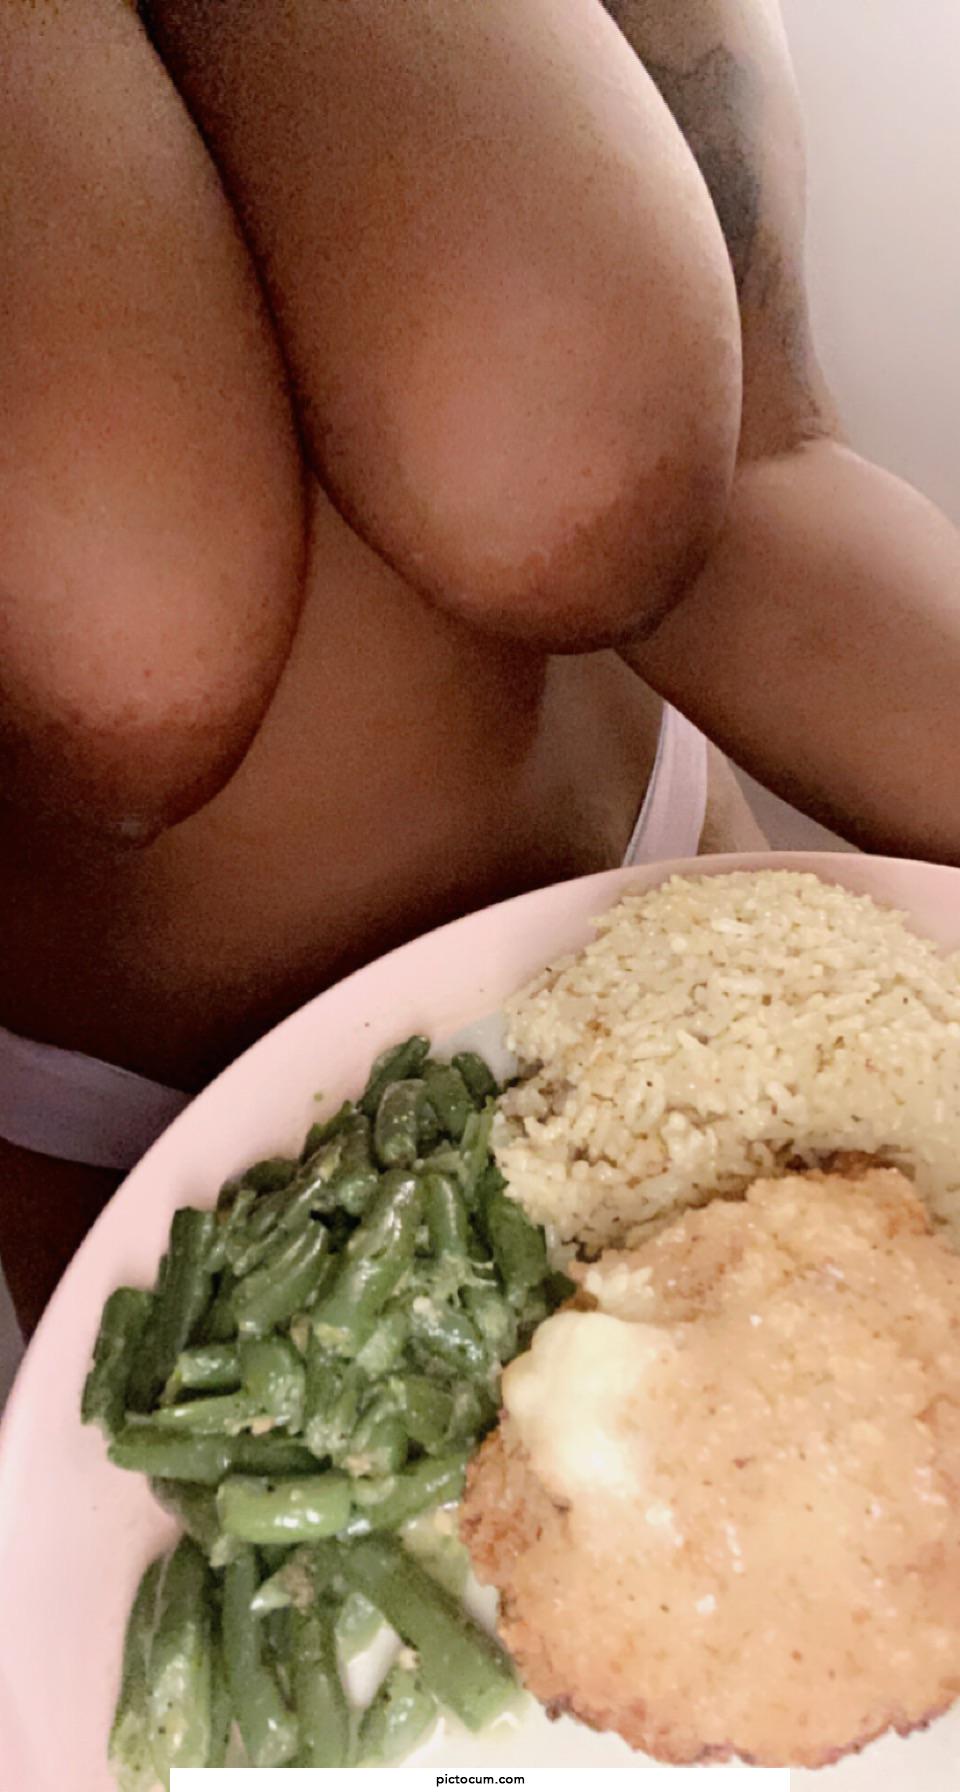 Made a plate for you daddy🤤😜😘🥰what you eating first?!🤔🧐